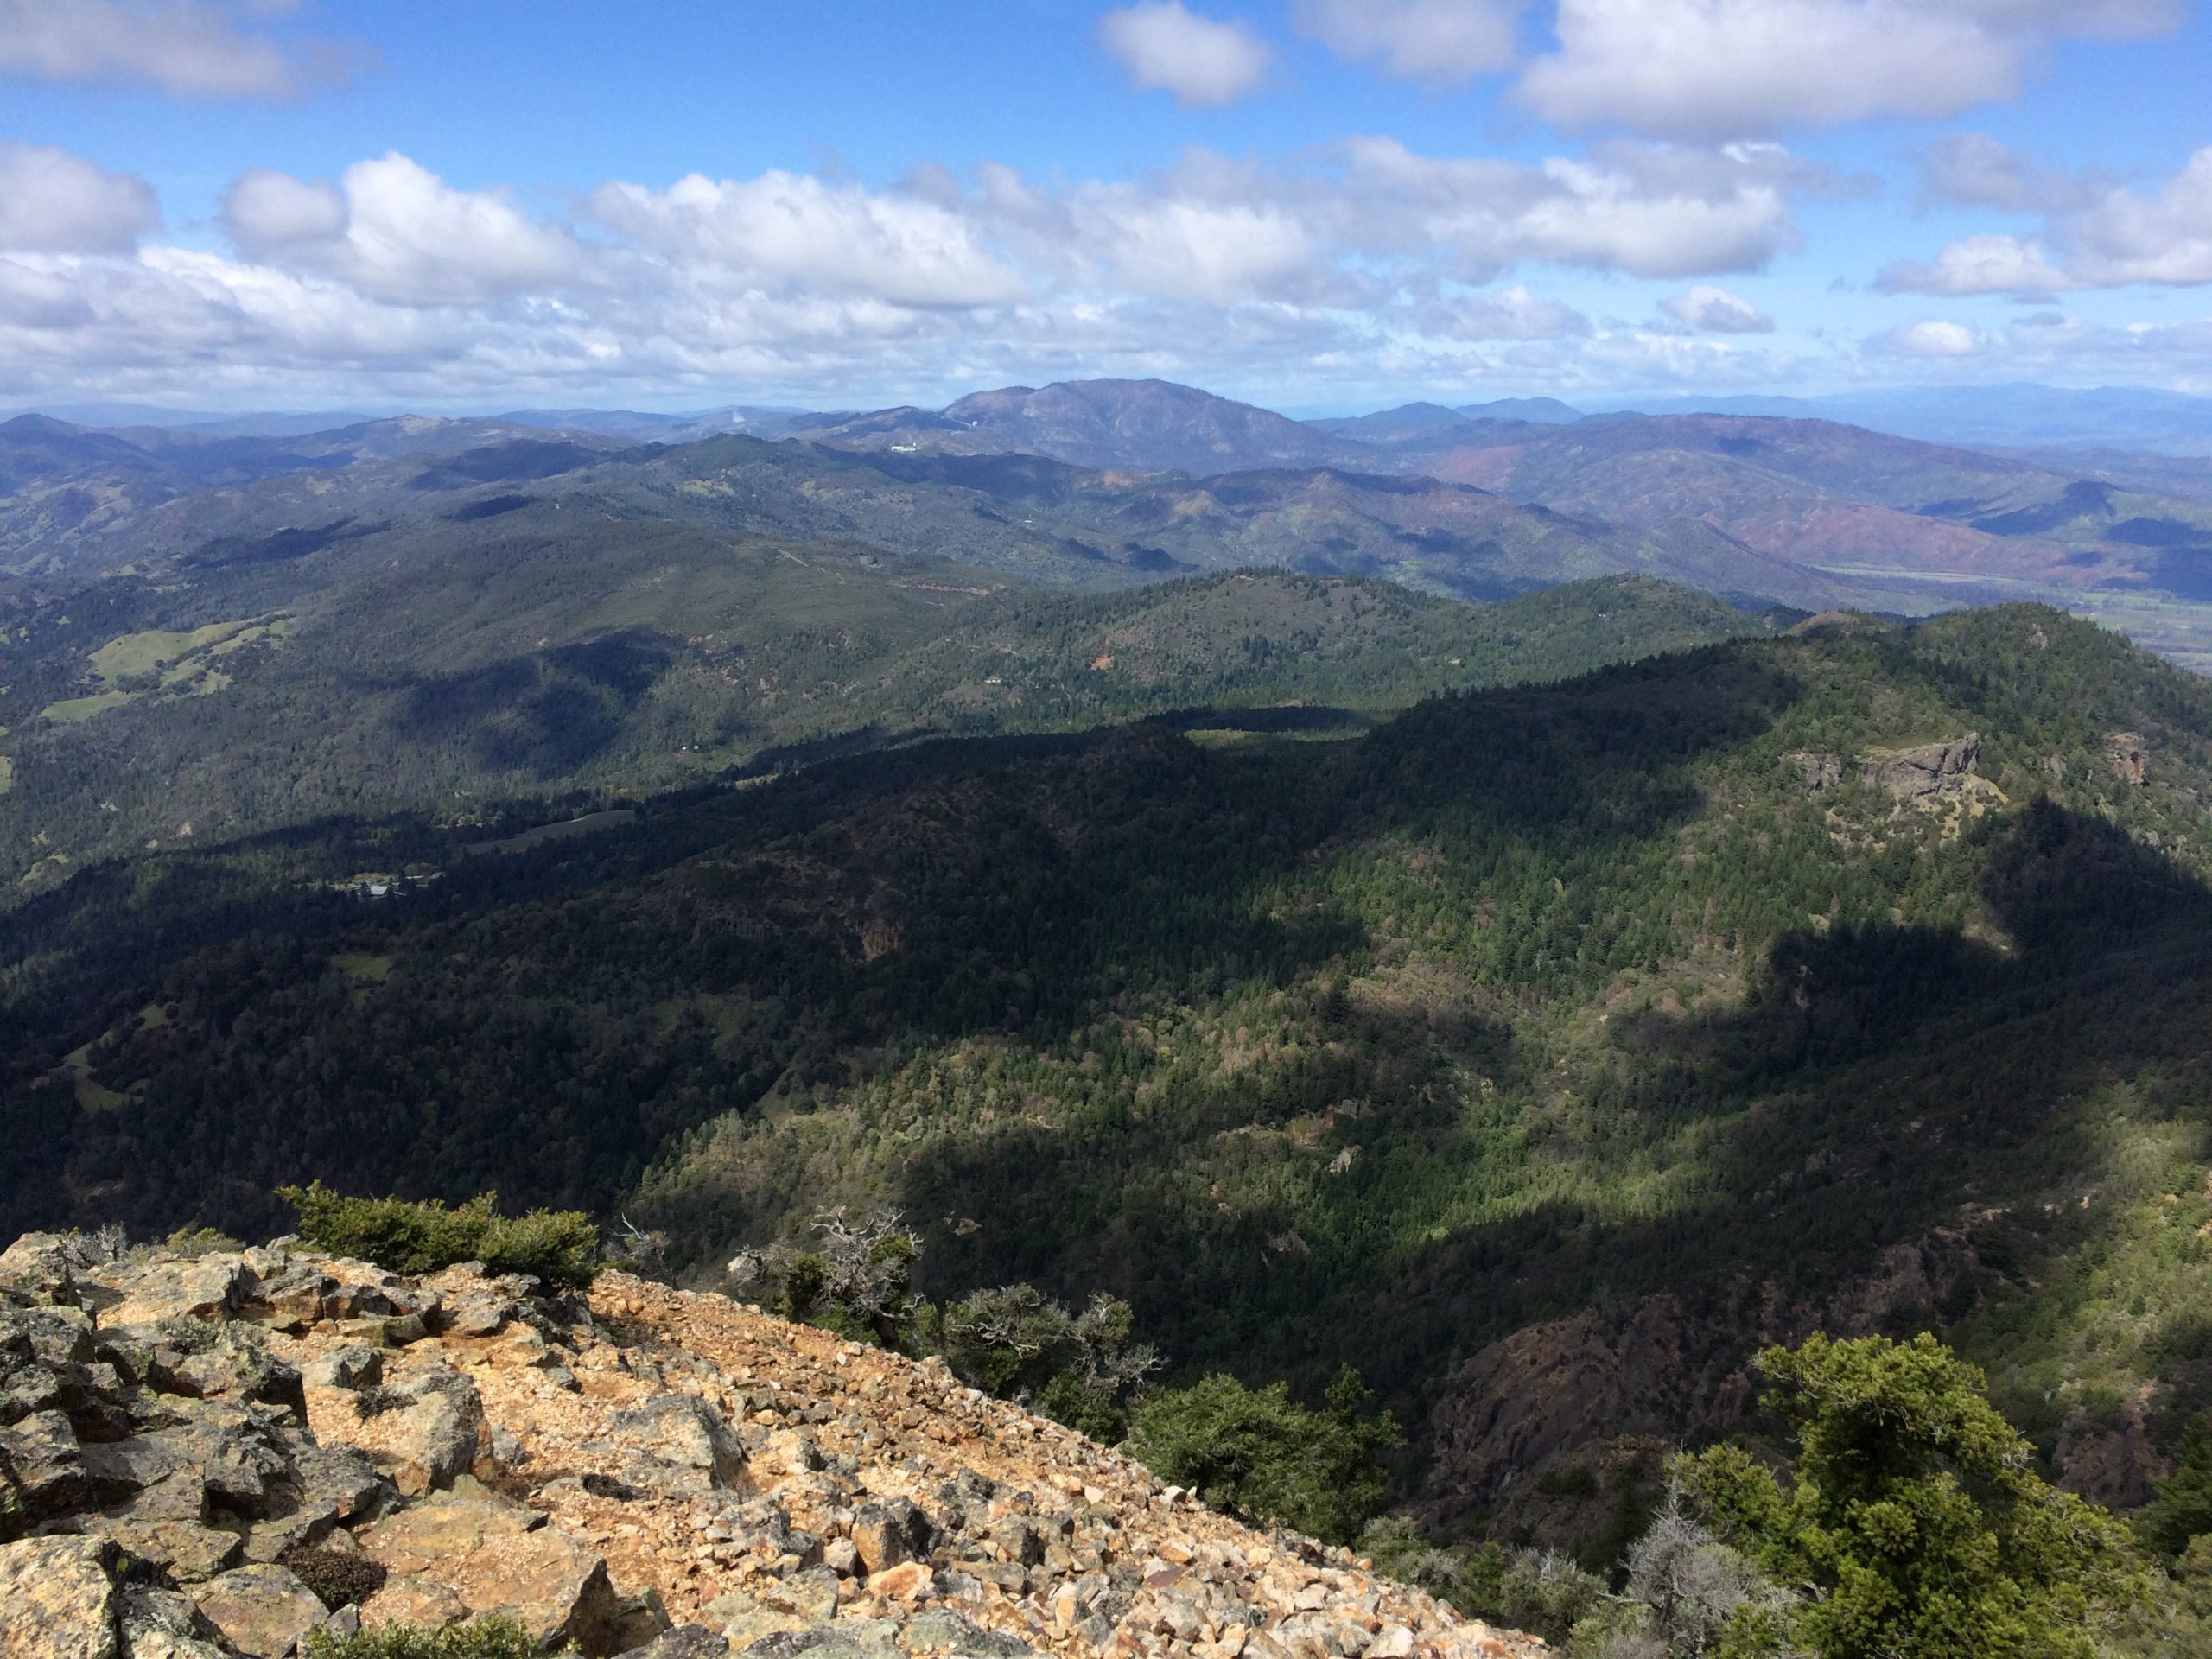 View from the north peak of Mt. Saint Helena